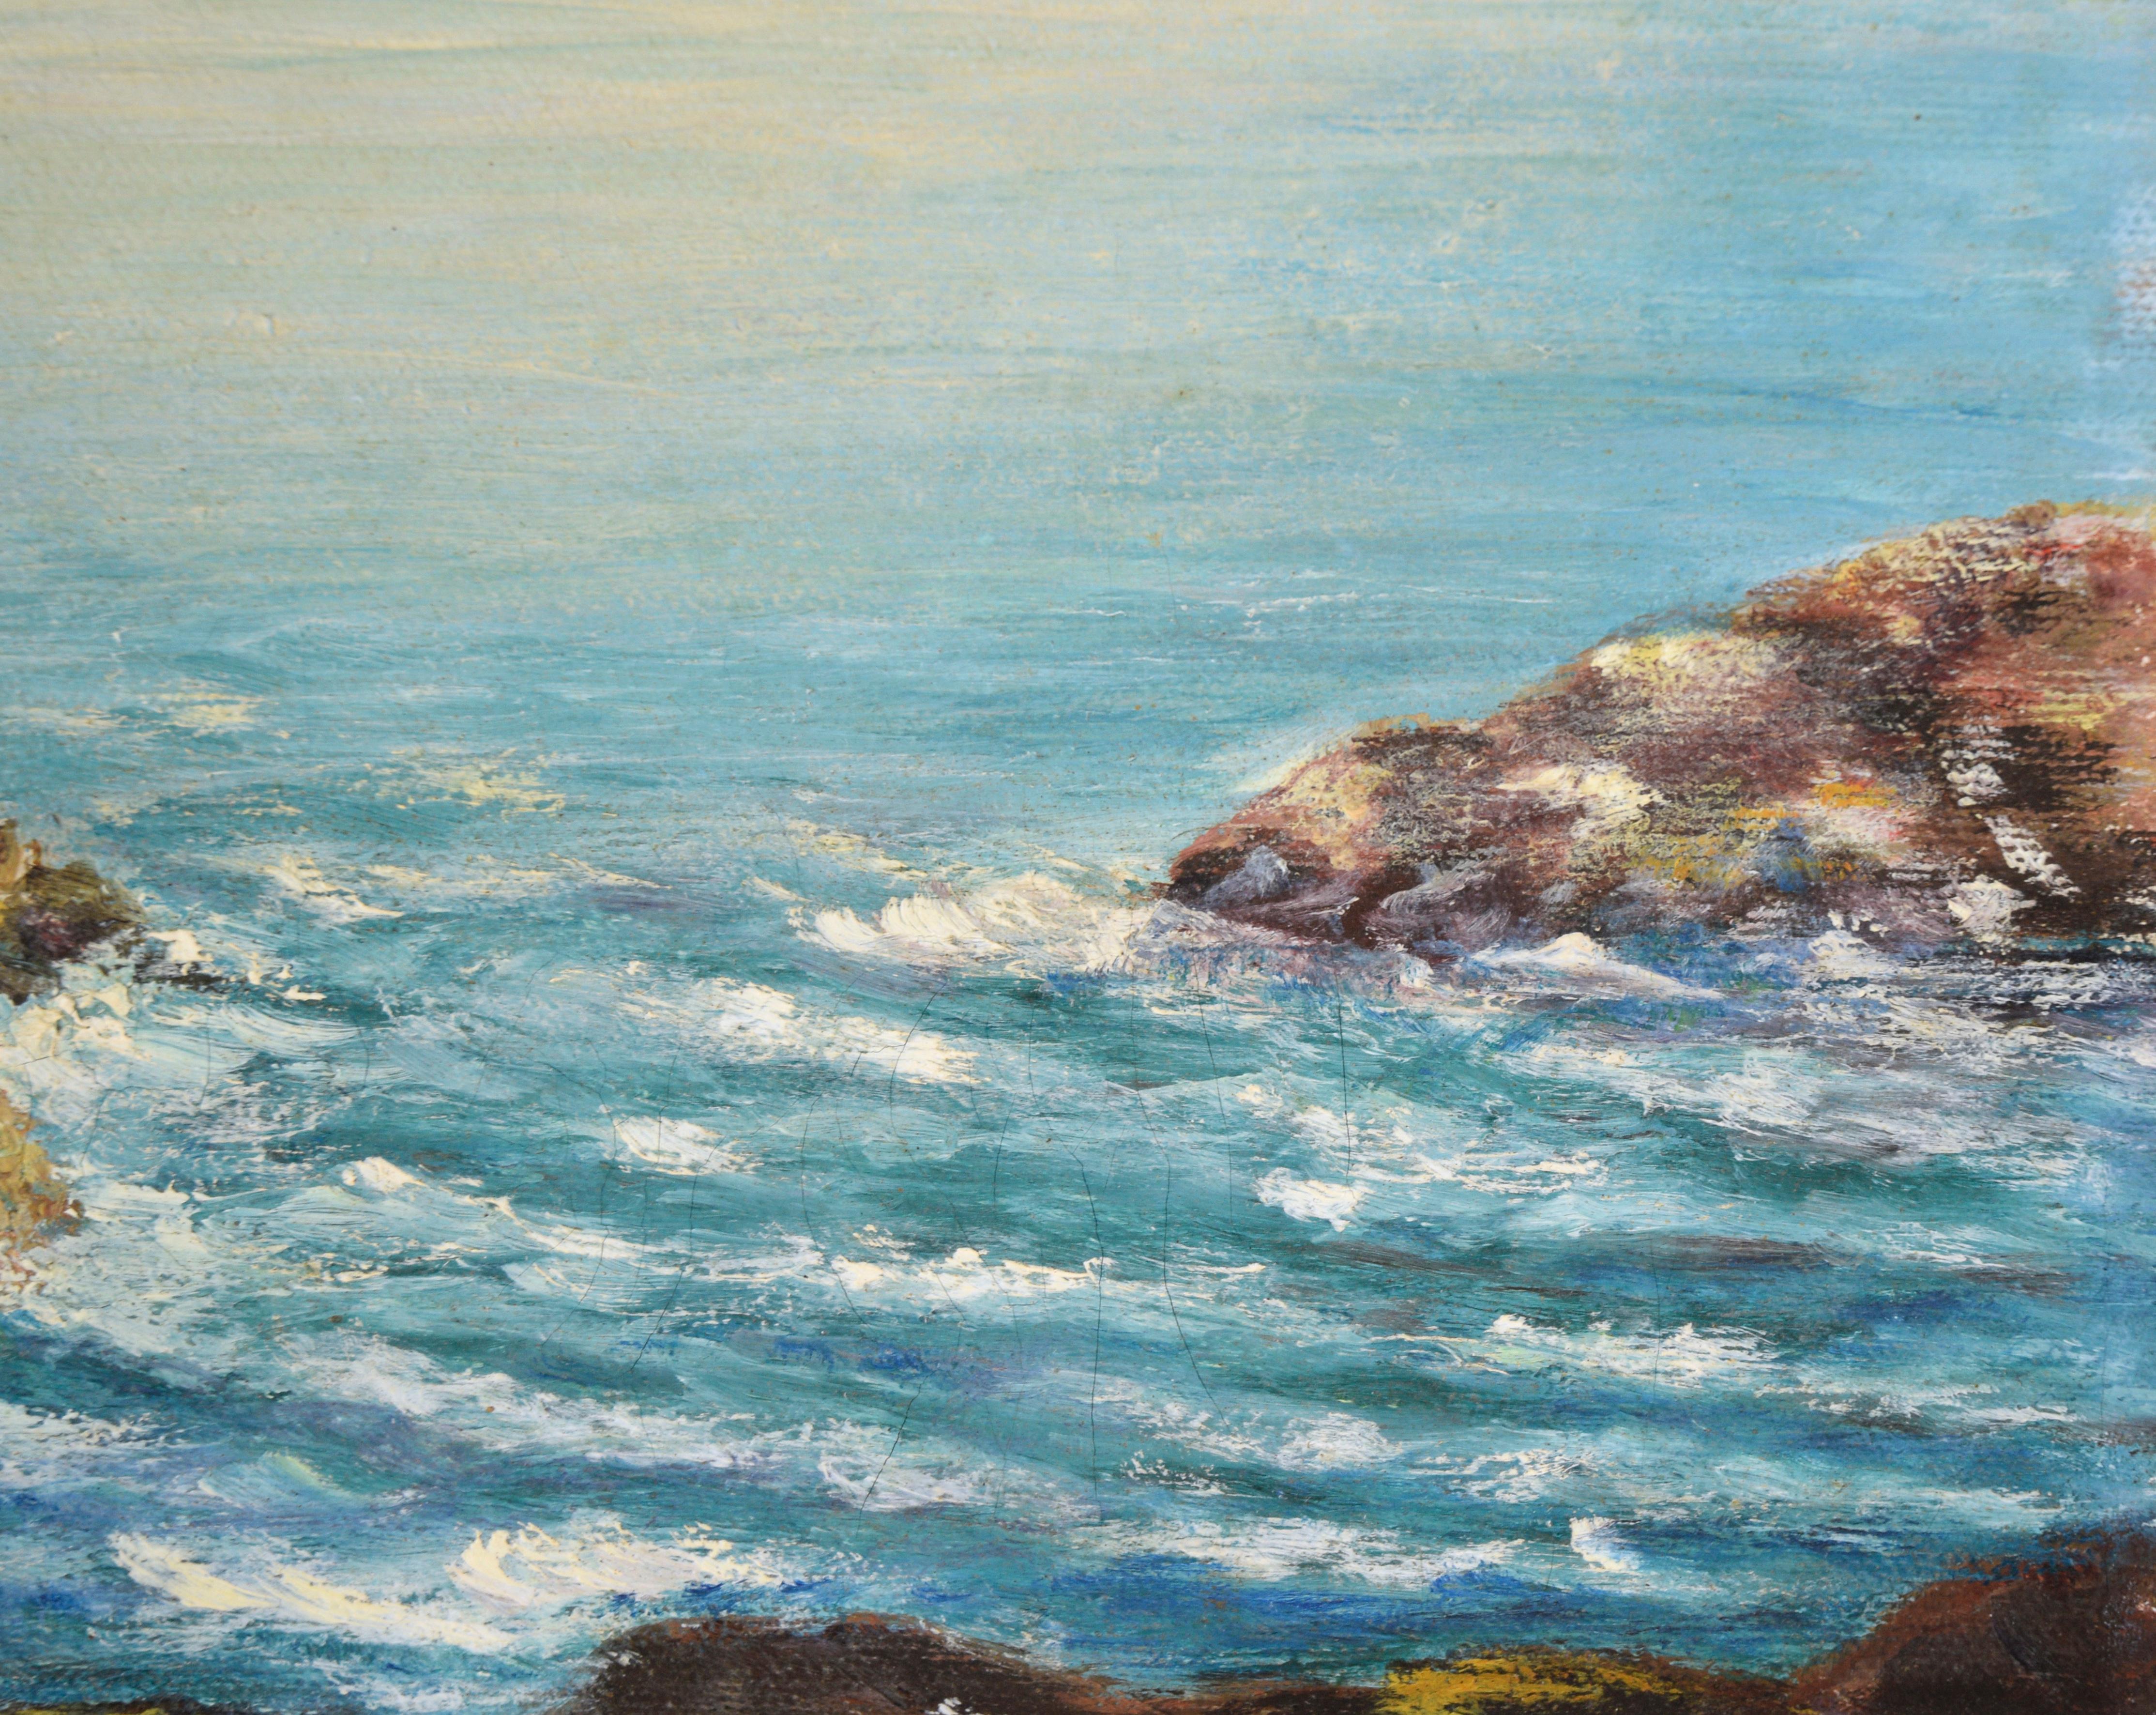 Monterey Cypress - Carmel by the Sea California Seascape in Oil on Canvas For Sale 2